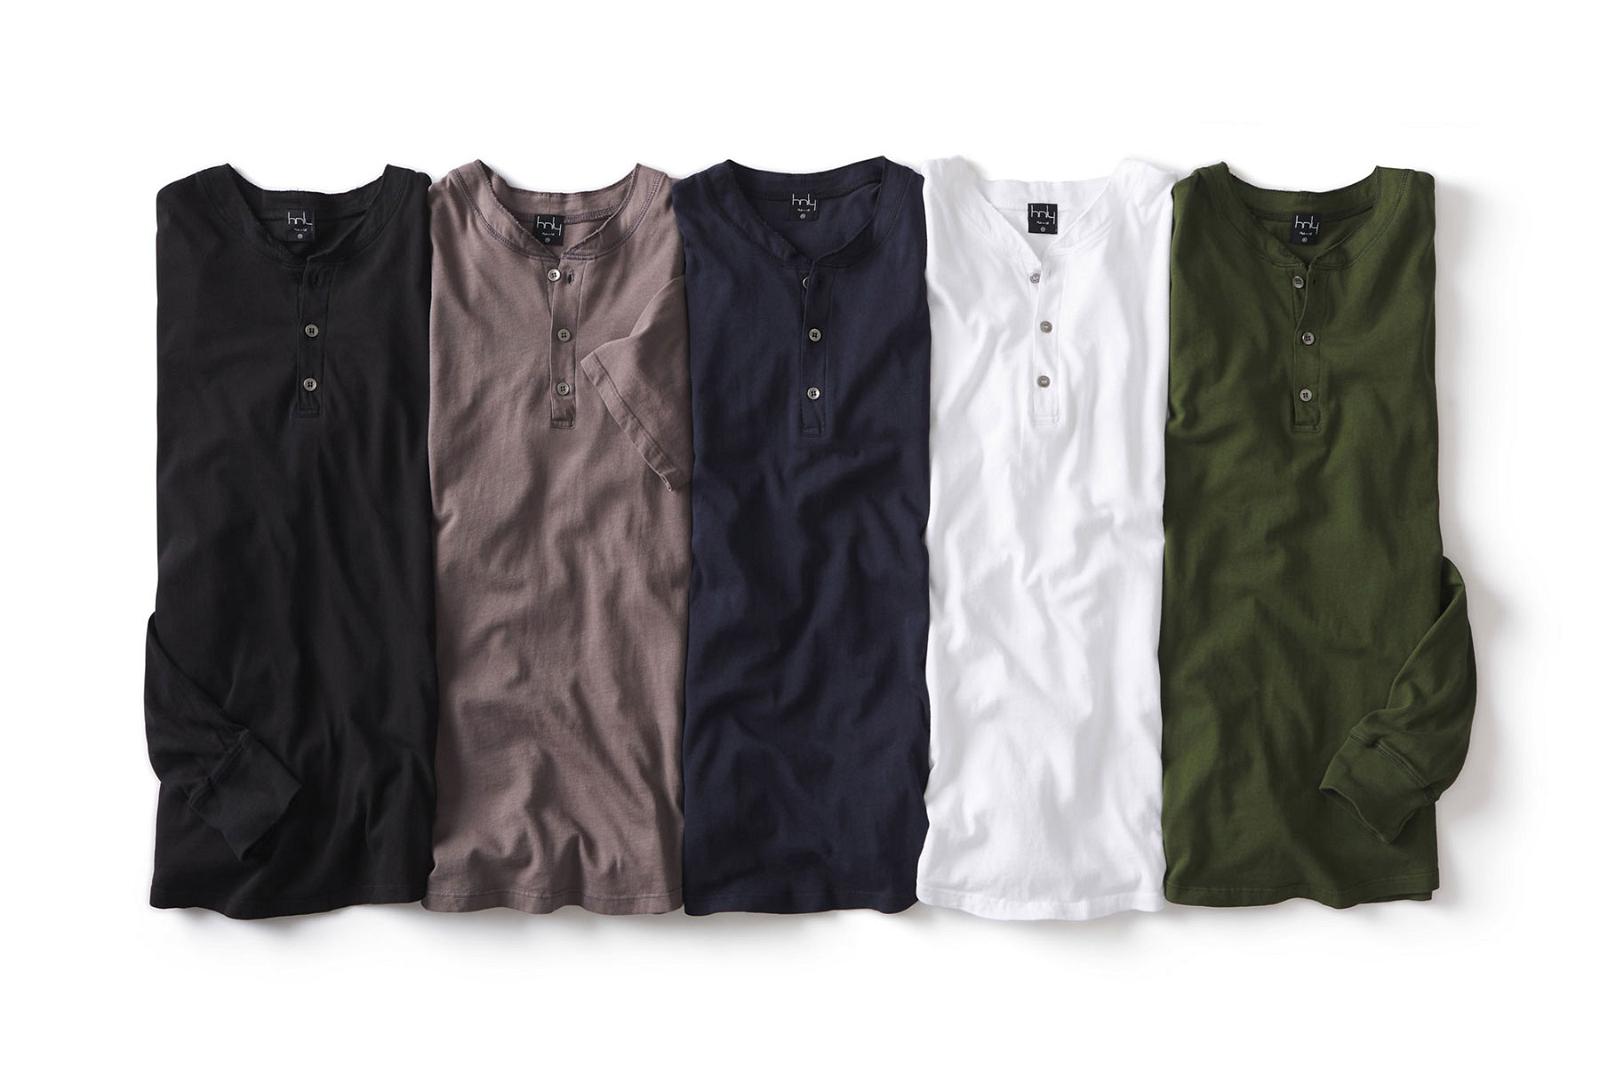 HNLY LA is Making Some of the Best Men's Basics Right Now